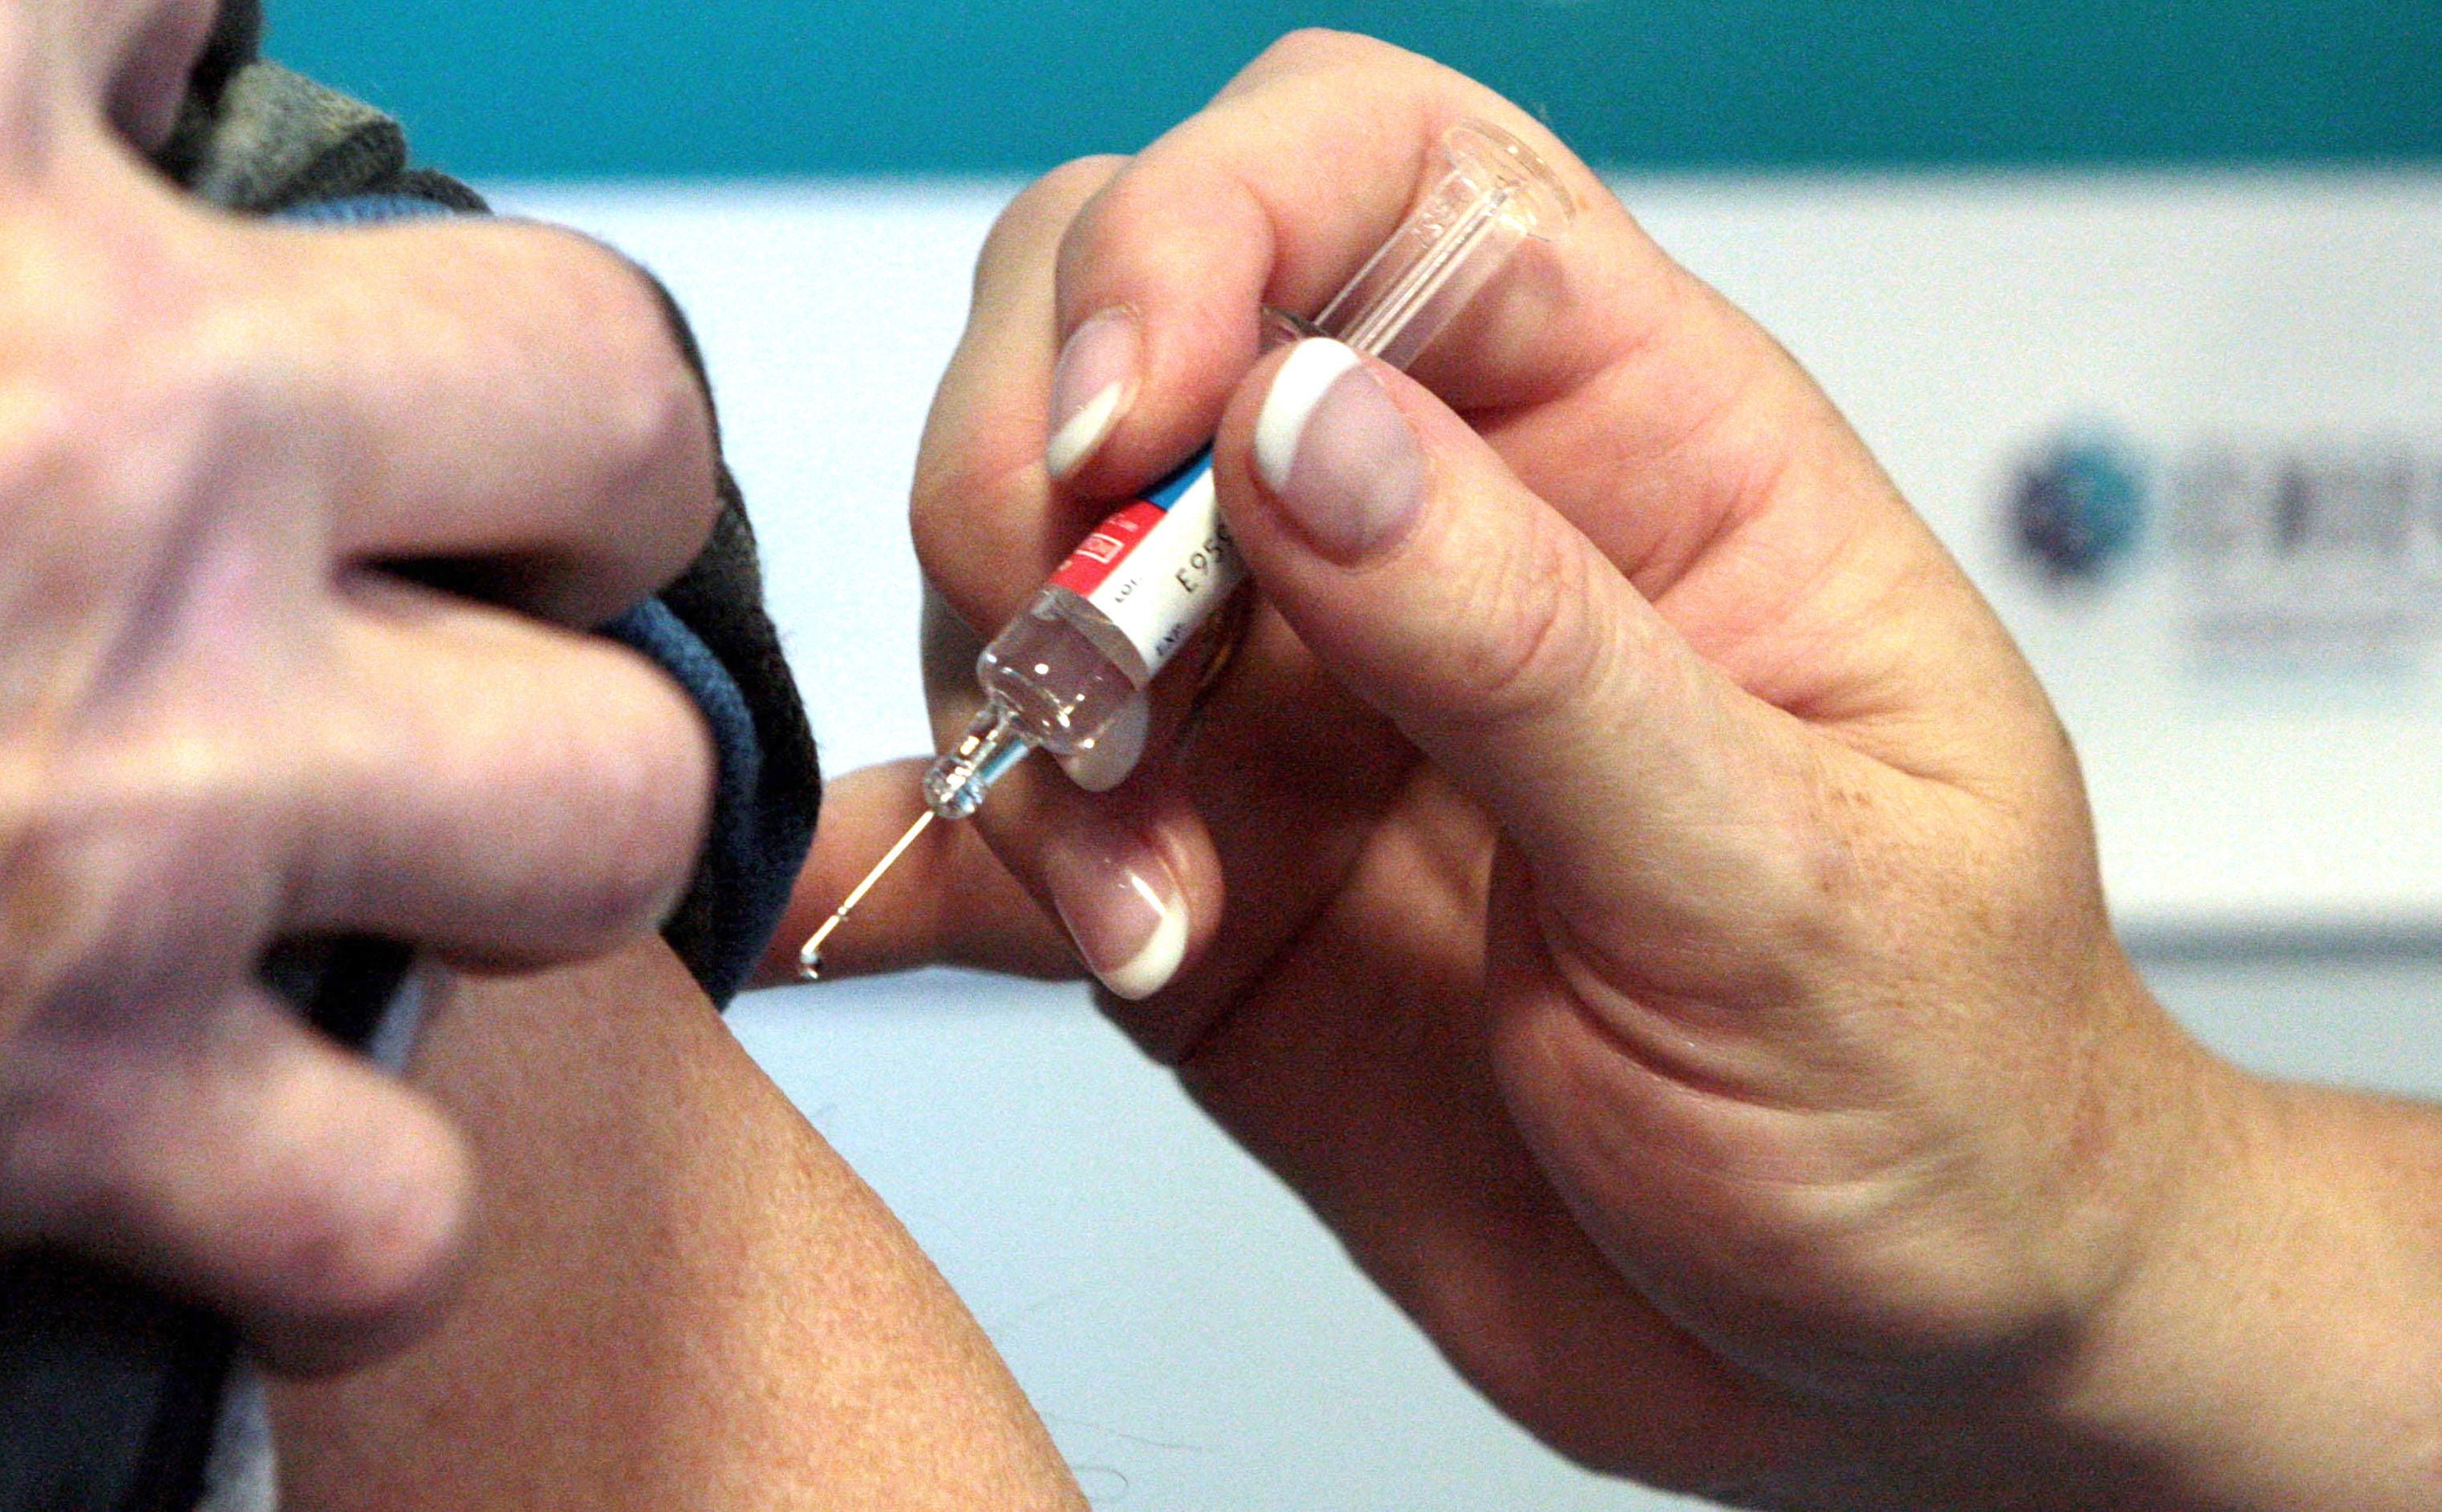 A file photo shows a person receiving a vaccination.